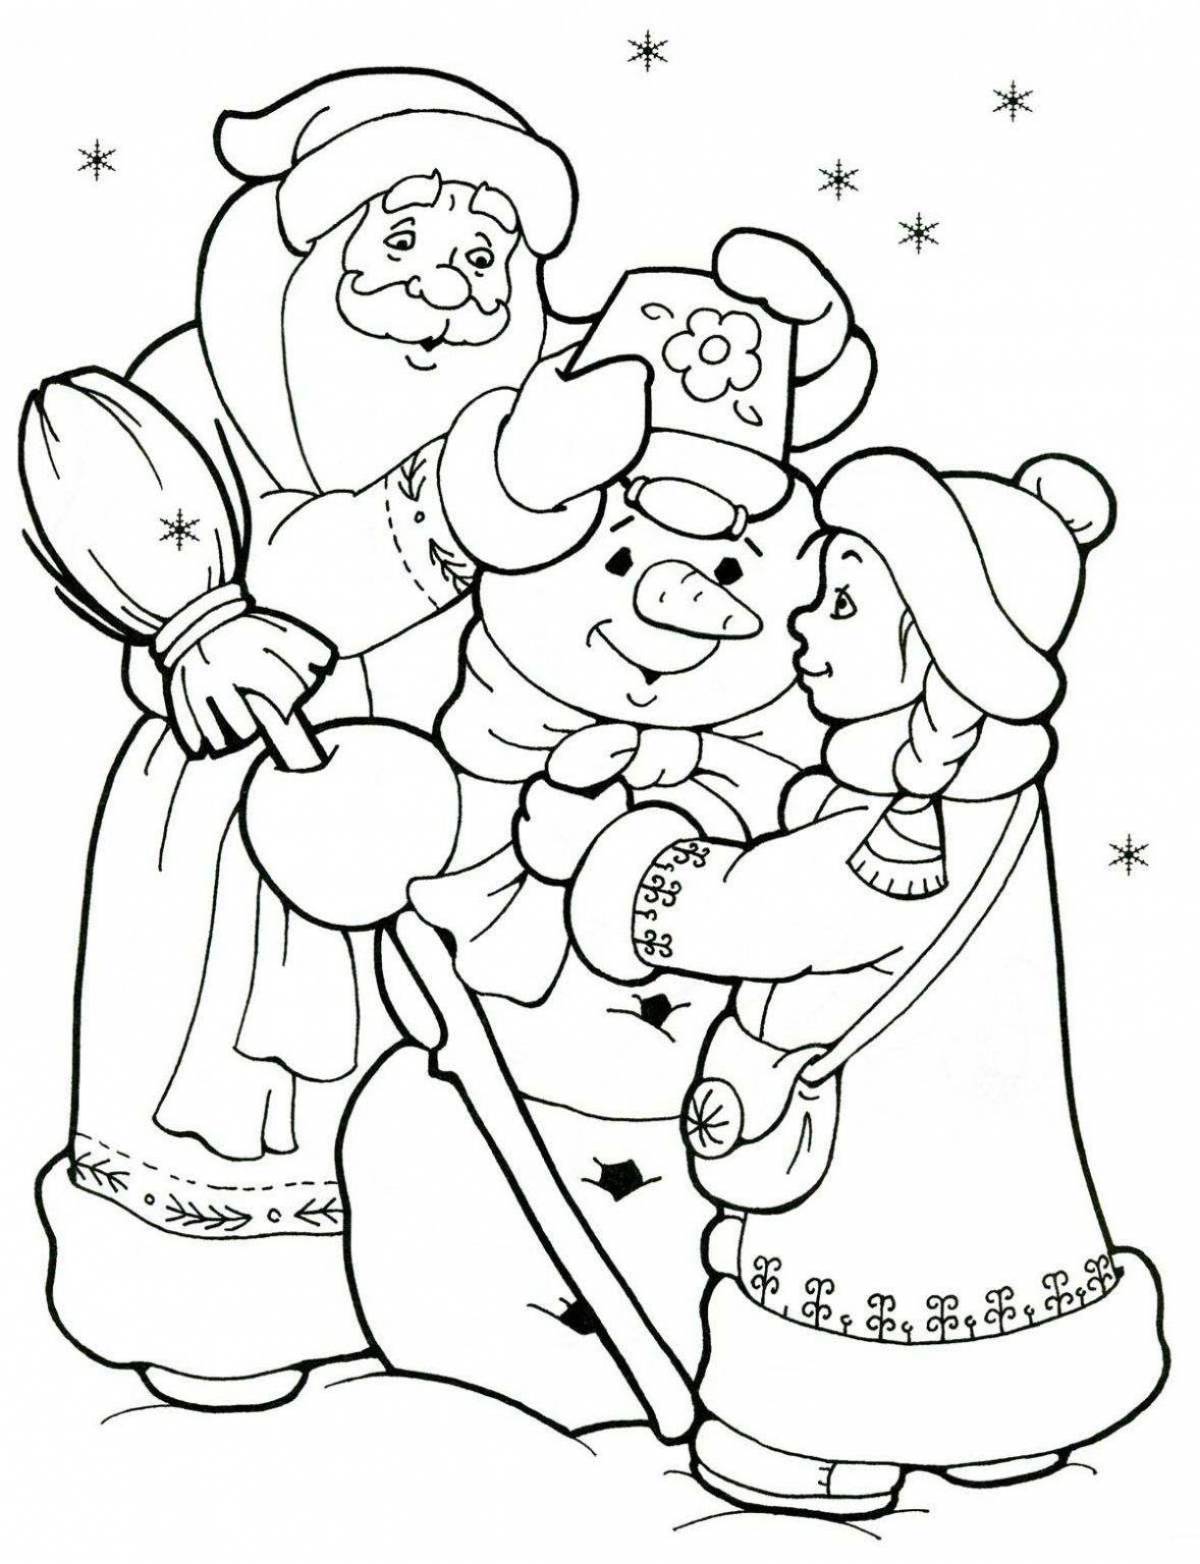 Coloring book dazzling Christmas tree